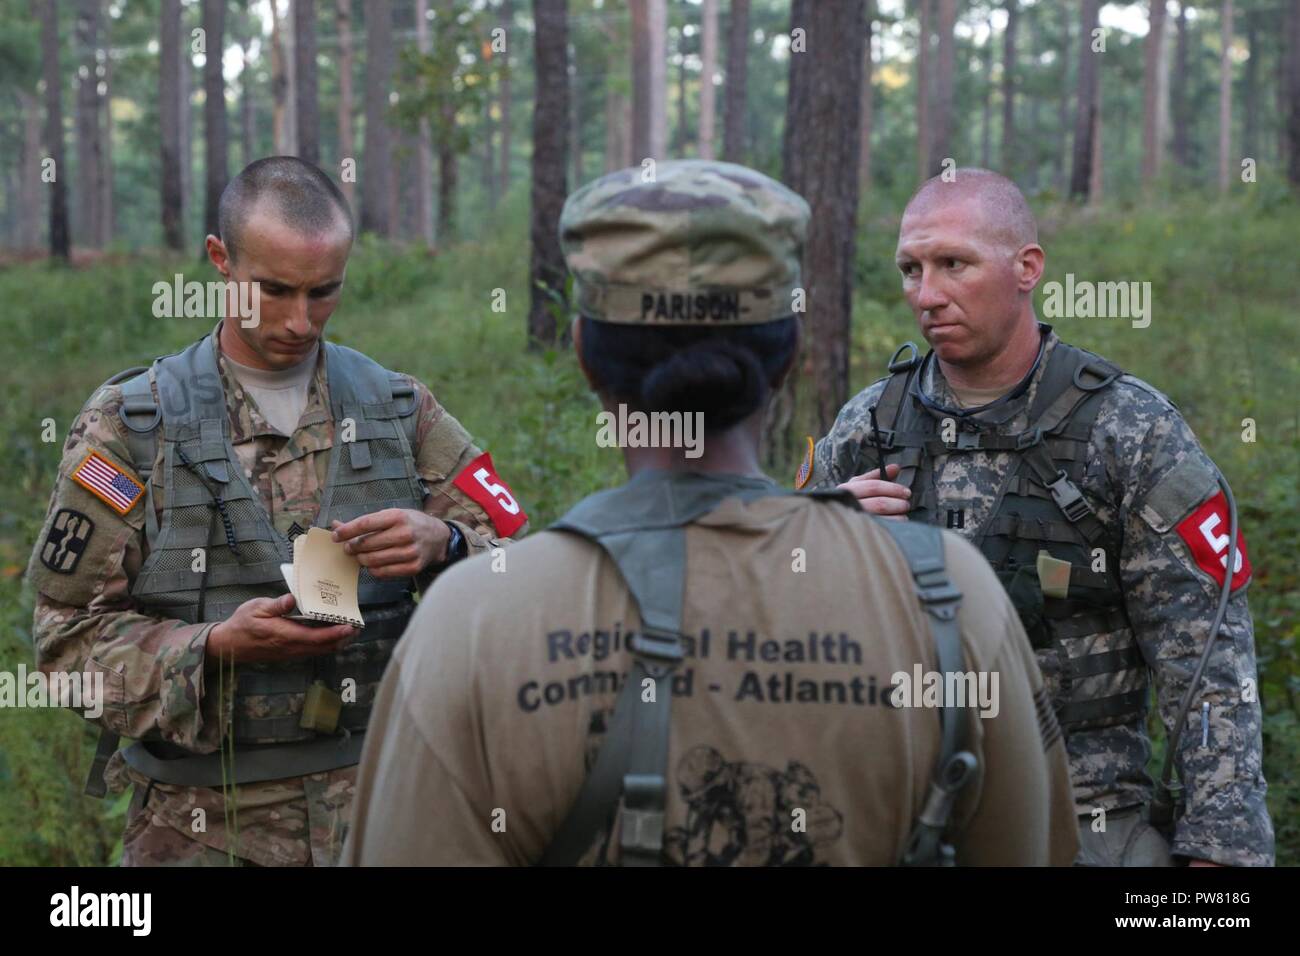 U.S. Army Staff Sgt. Joseph Karslo and Capt. Jeremy Lewis, assigned to the Public Health Command - Atlantic, listen to instructions during the 2017 Best Medic Competition at Fort Bragg, N.C., Sept. 19, 2017. The competition tested the physical and mental toughness, as well as the technical competence, of each medic to identify the team moving forward to represent the region at the next level of the competition. Stock Photo